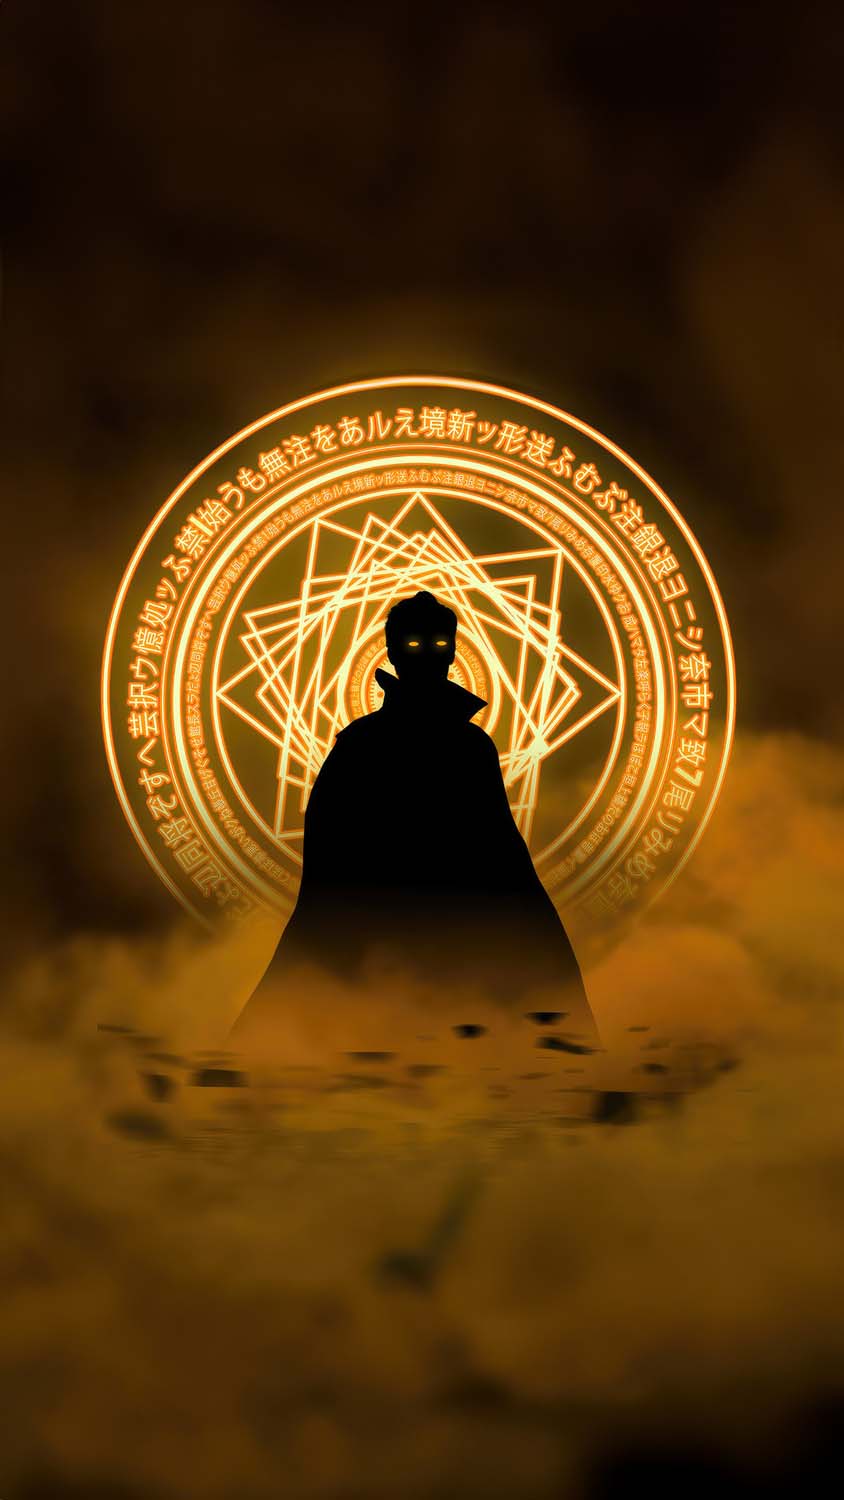 doctor strange in Tranquility iPhone Wallpaper